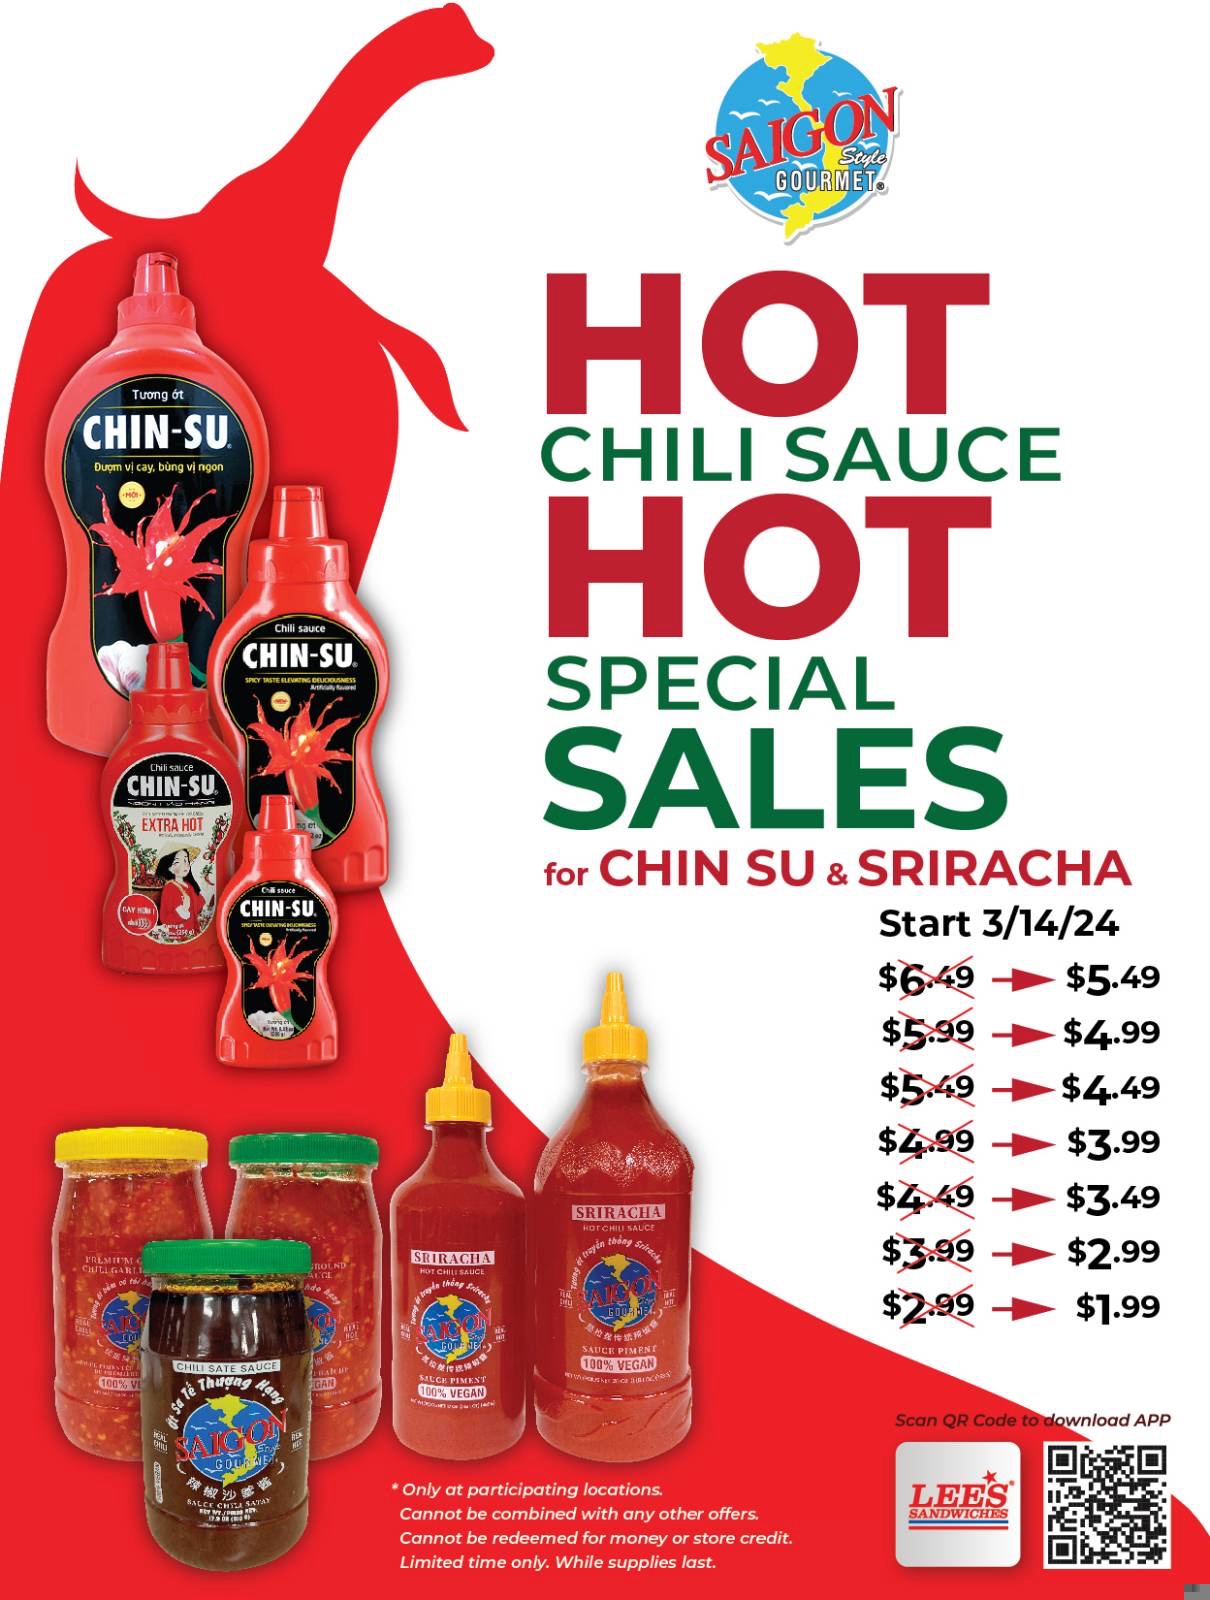 Hot Chili Sauce Hot Special Sales selected Chinsu & Siracha from 3/14/24 at participating locations.